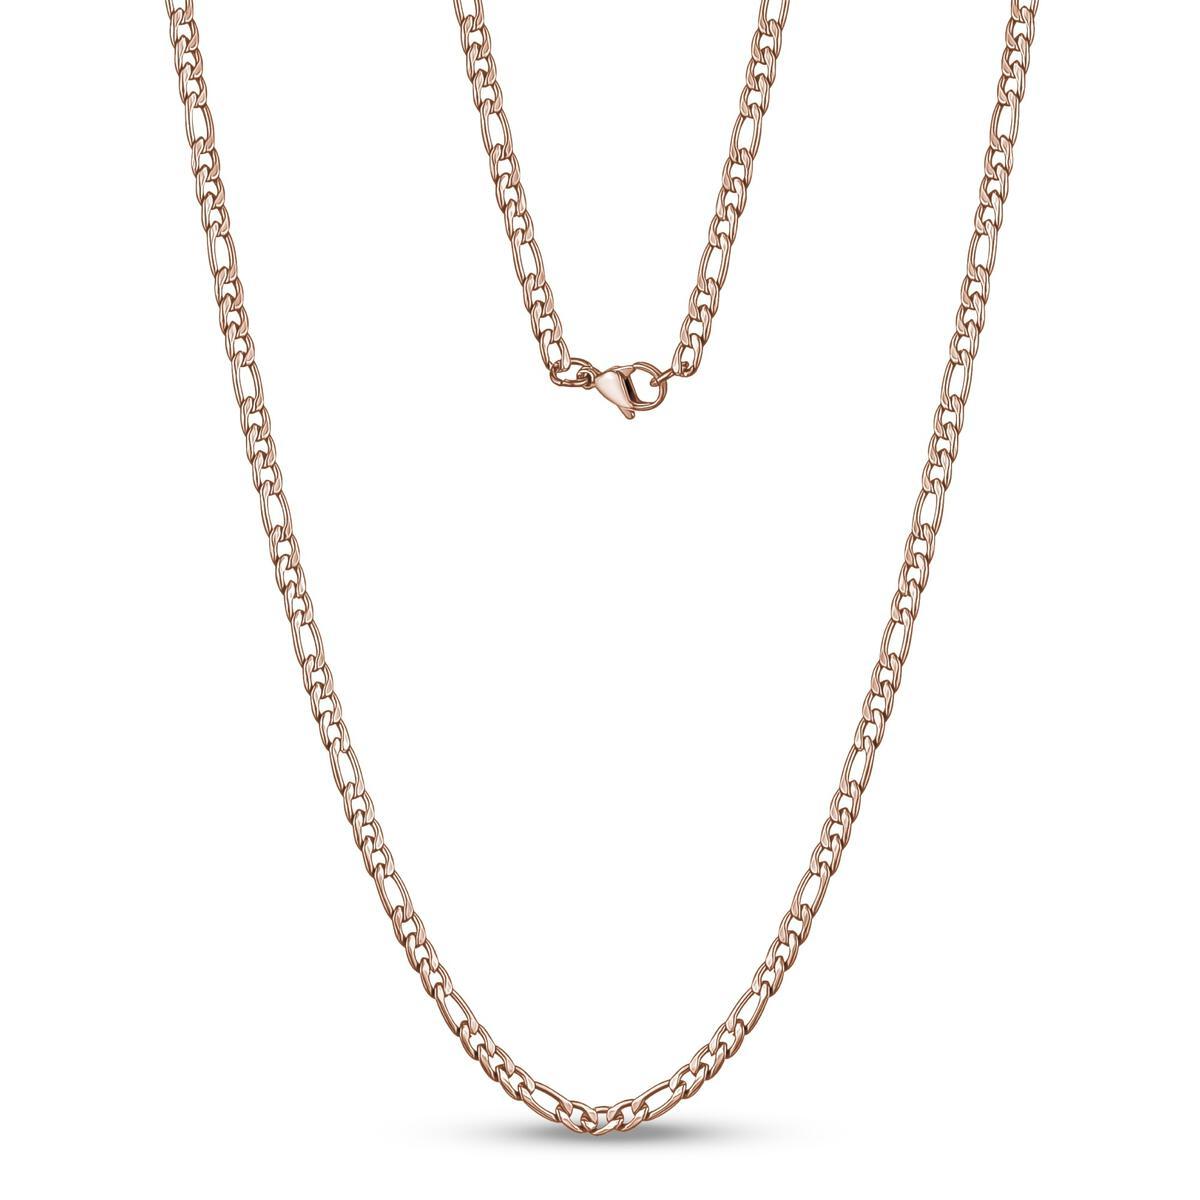 Stainless-Steel Figaro Link Necklace | ARZ Steel | Luby 